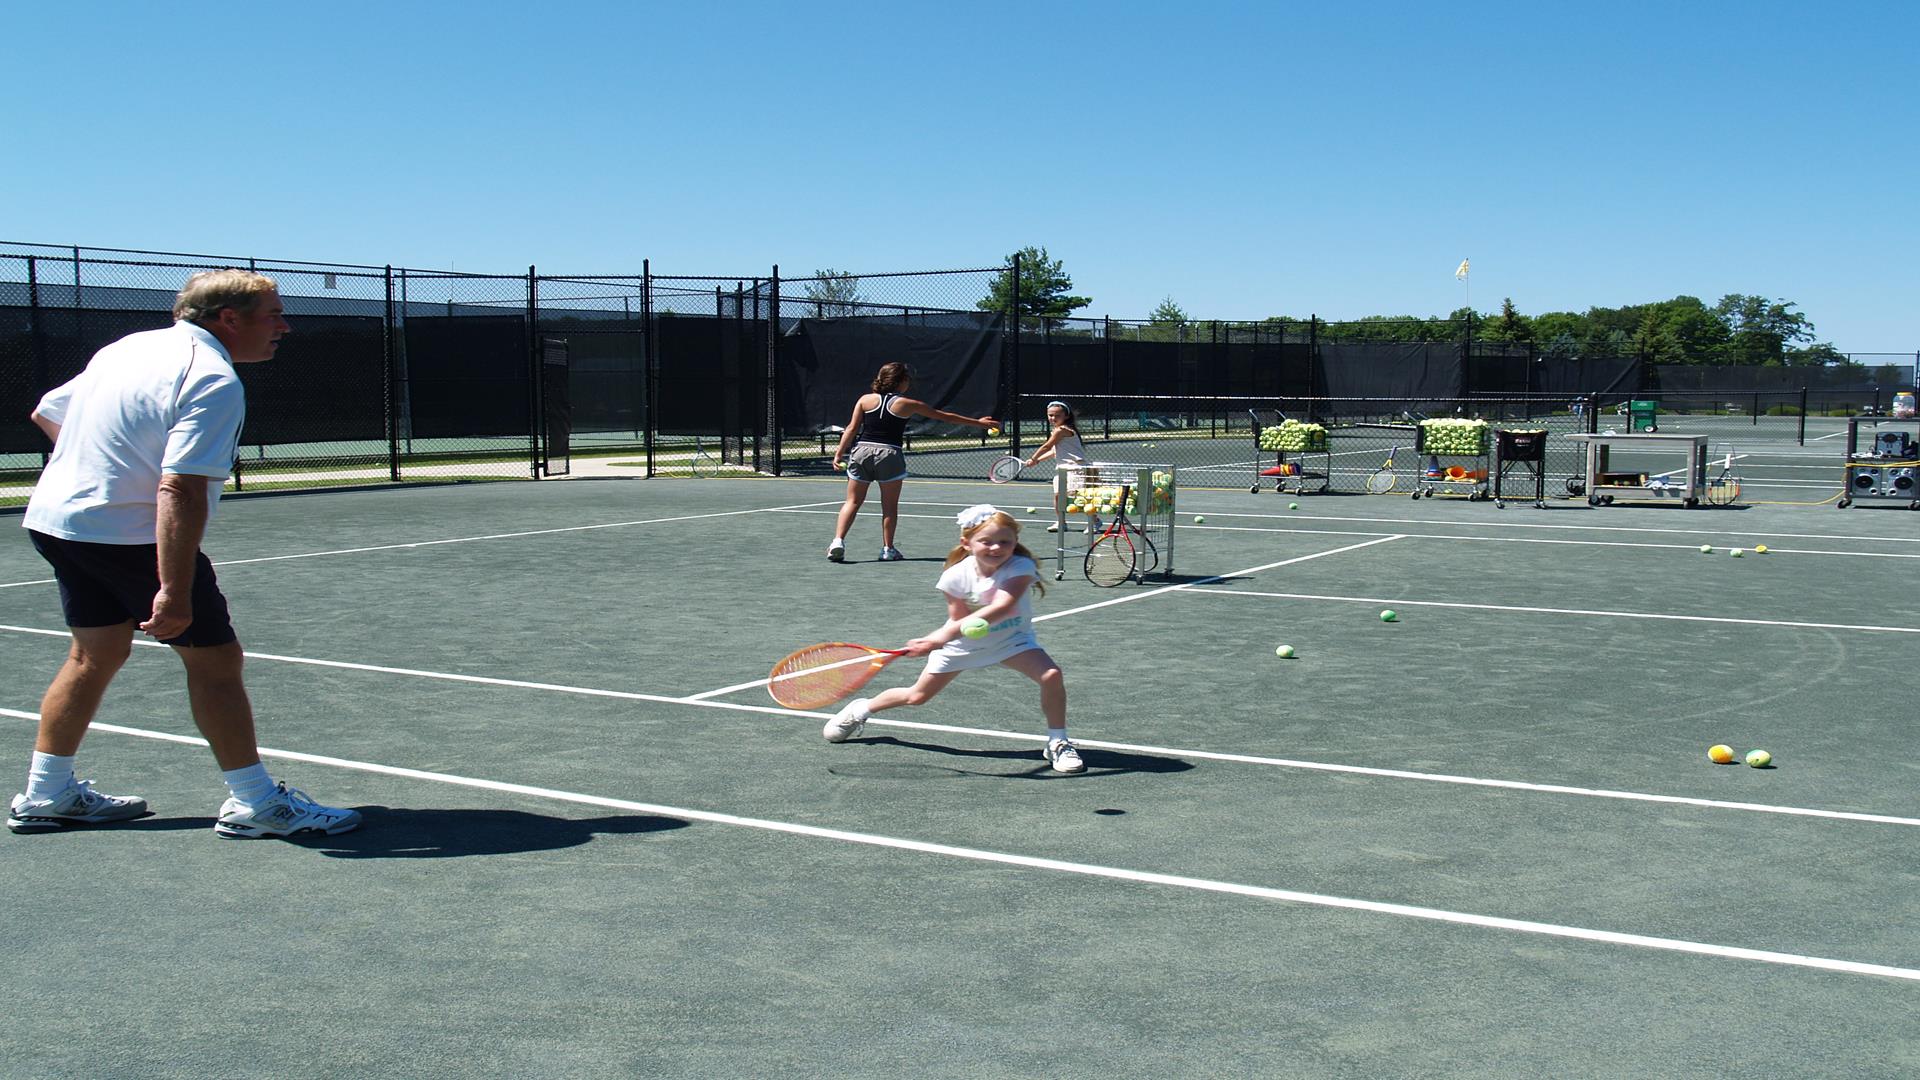 Racquet sports - offering tennis, bocce and pickle ball